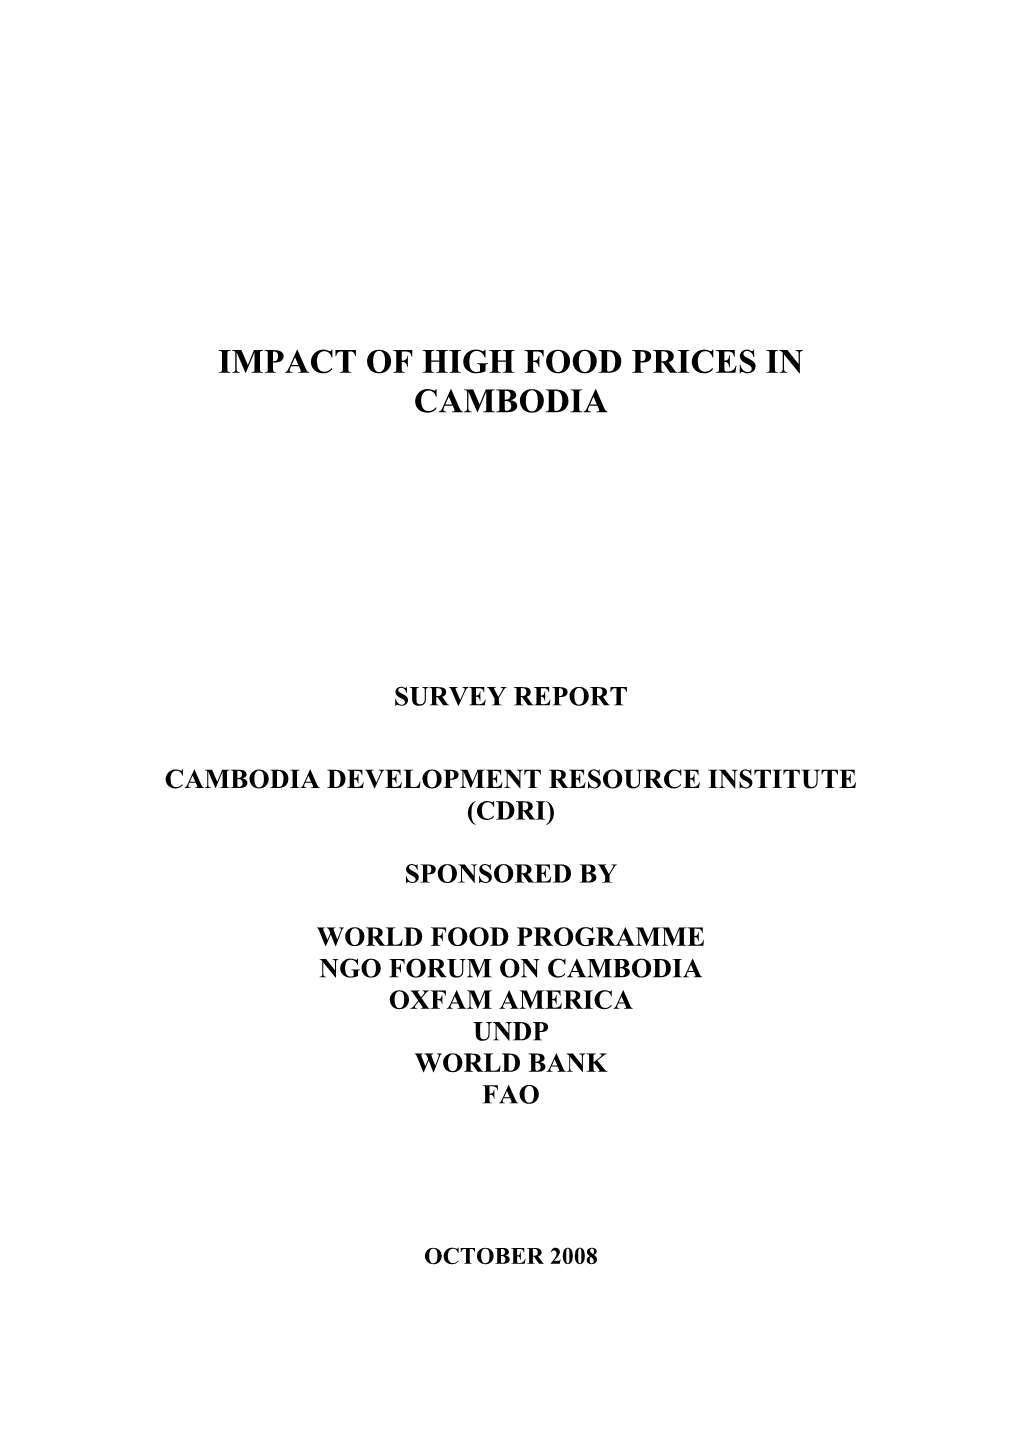 Impact of High Food Prices in Cambodia